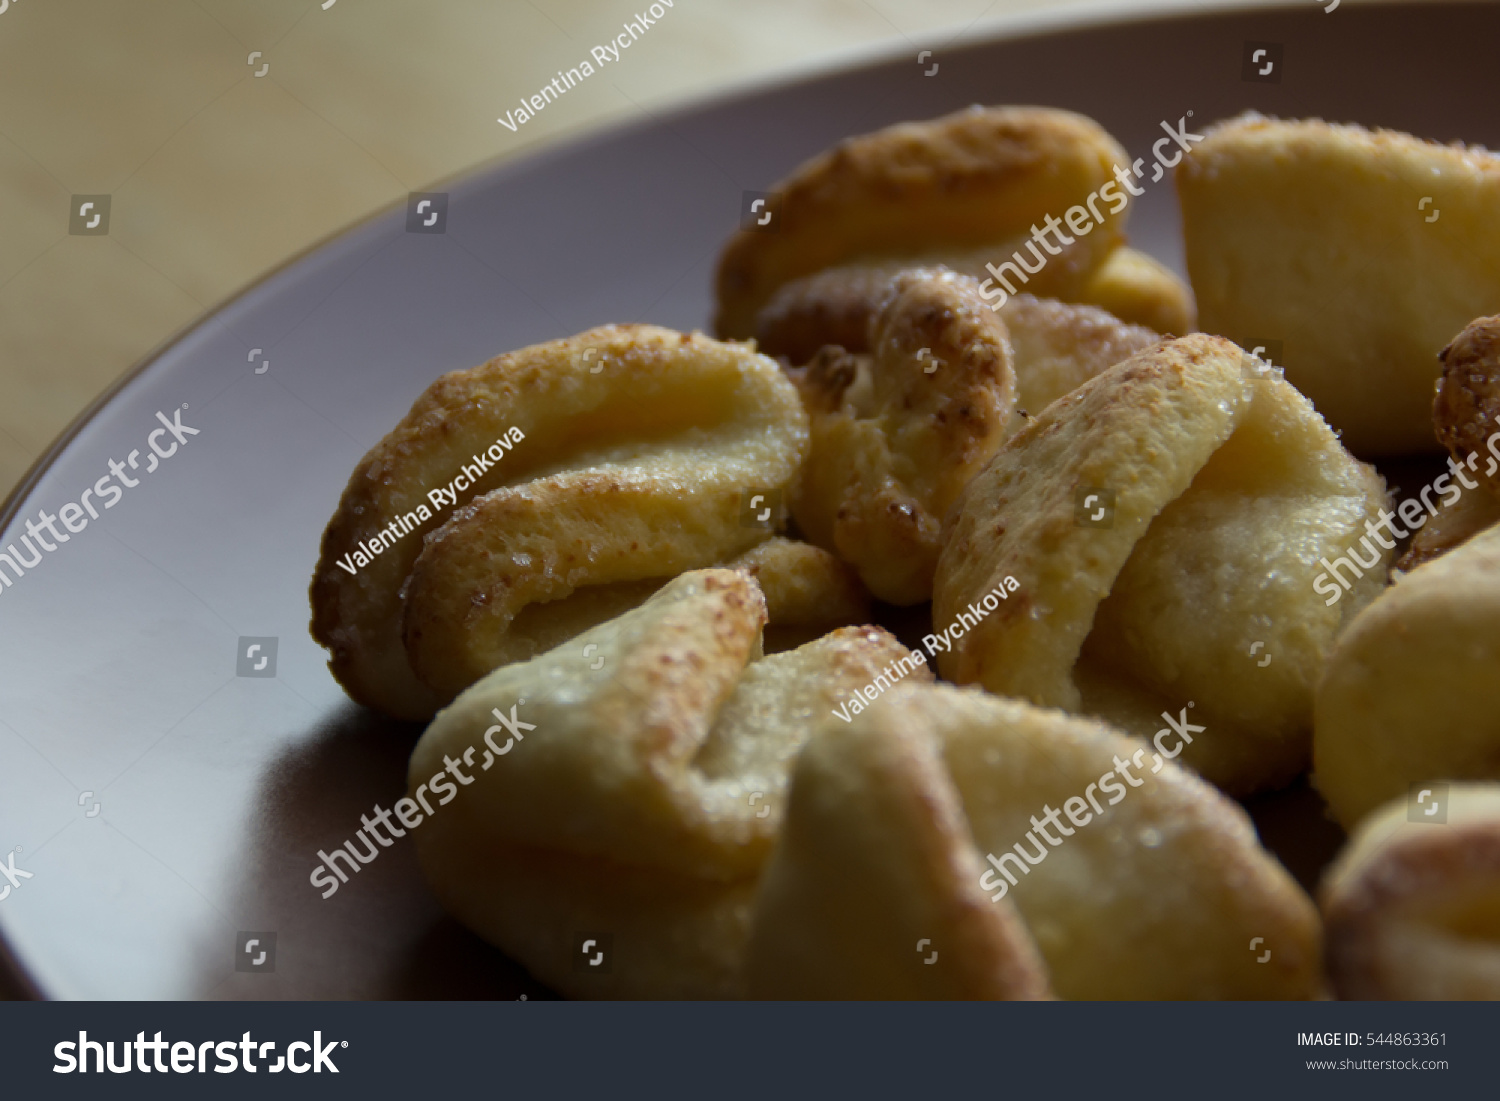 Cottage Cheese Biscuits Sugar Coating On Royalty Free Stock Image